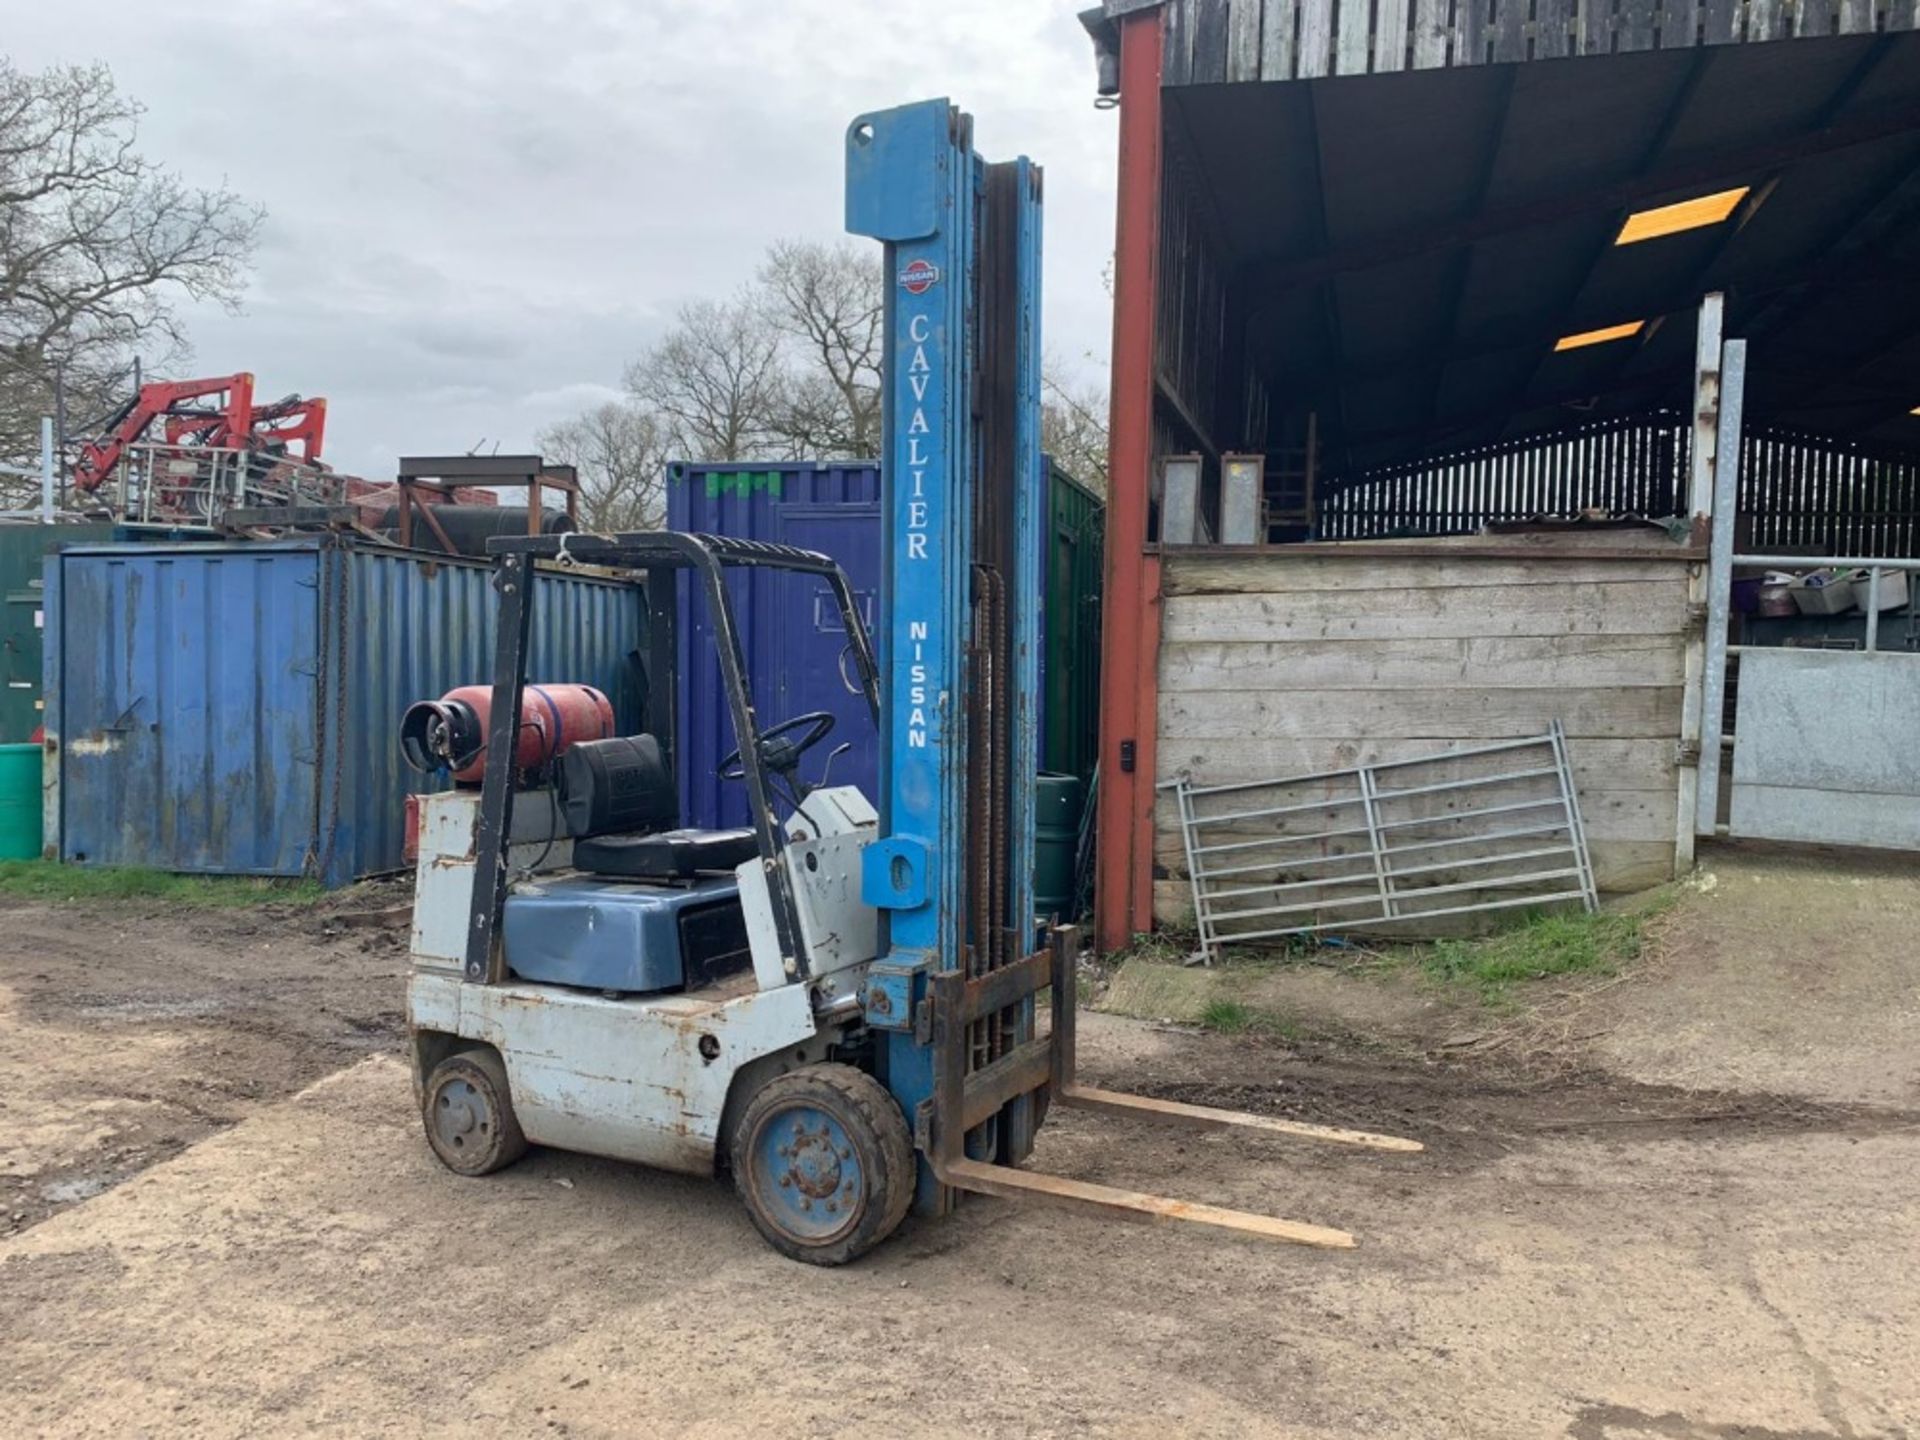 NISSAN CPF02 GAS POWERED FORKLIFT TRUCK, 7M LIFT HEIGHT, 2 TONNE LIFT, HOUR CLOCK BLANK, YEAR